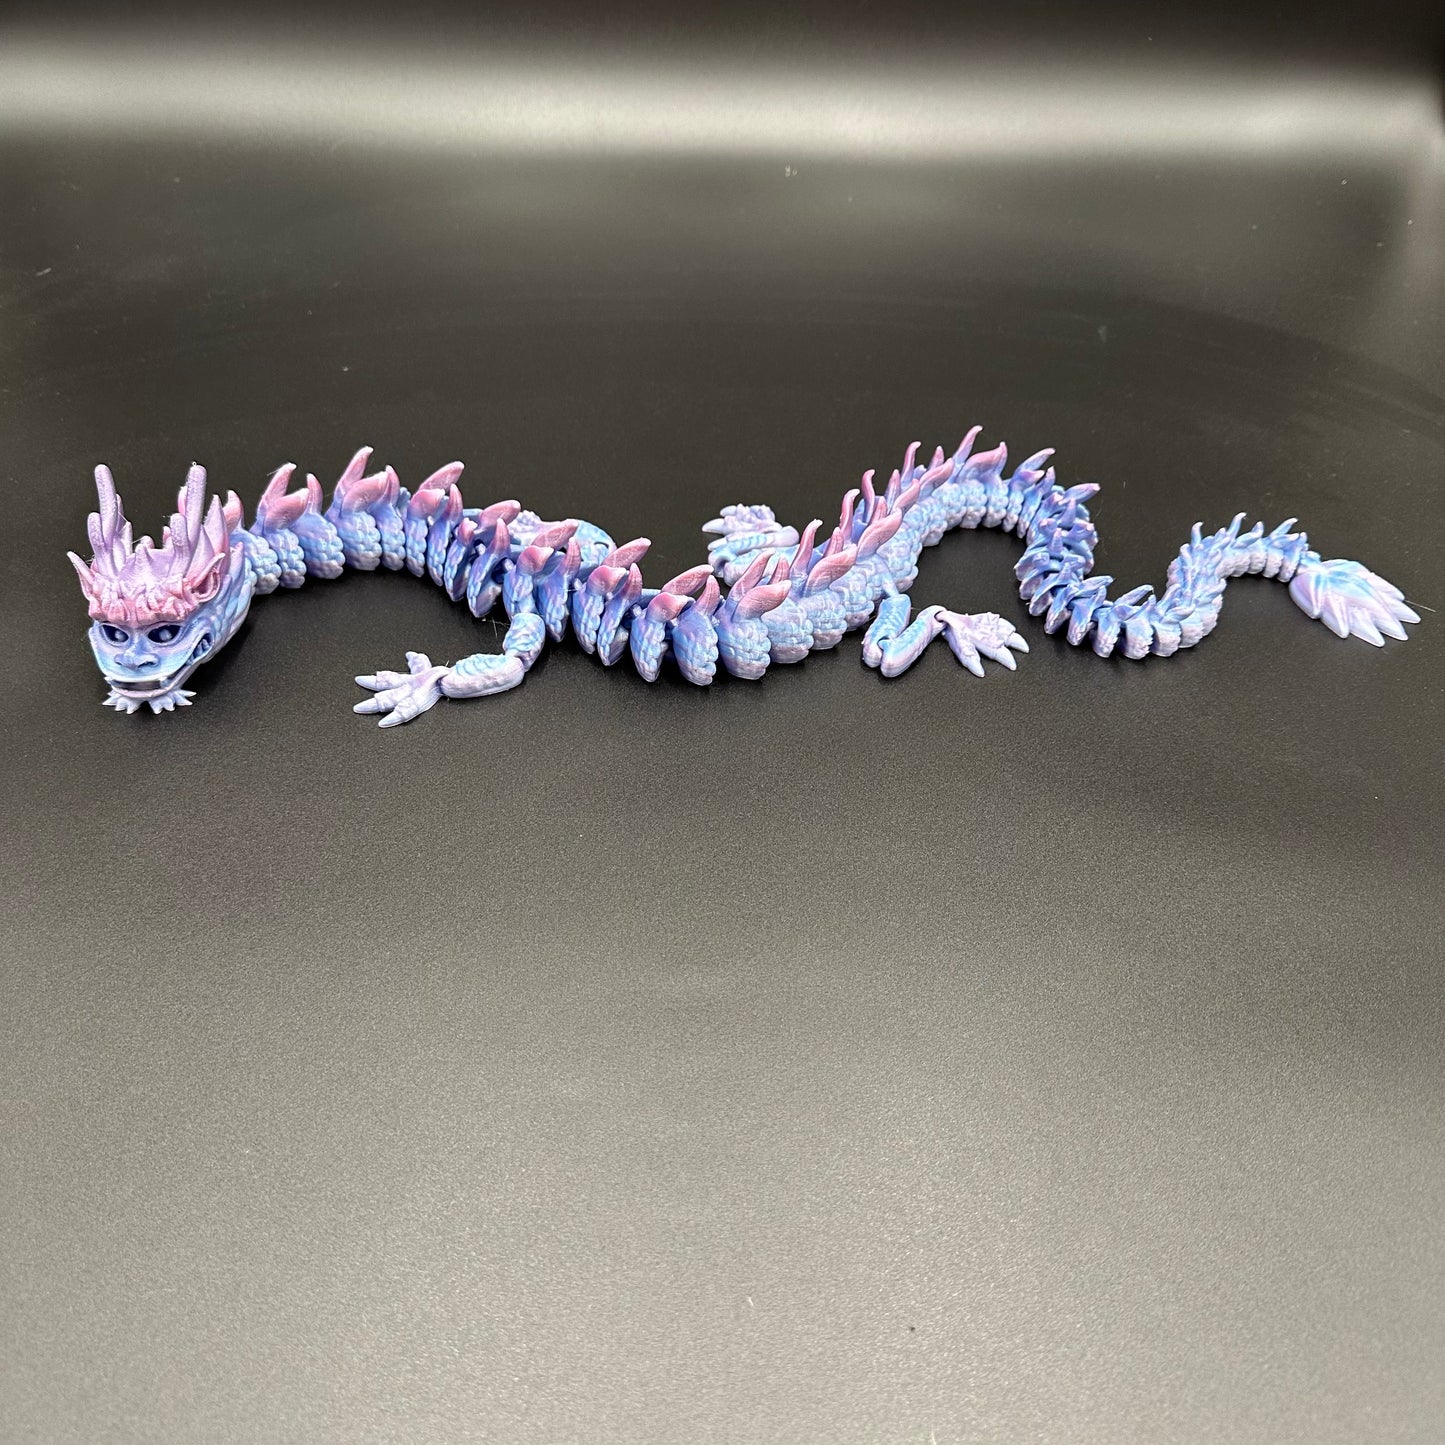 Flexi Imperial Dragon Special Larger Protopasta Edition - 31 Inches long